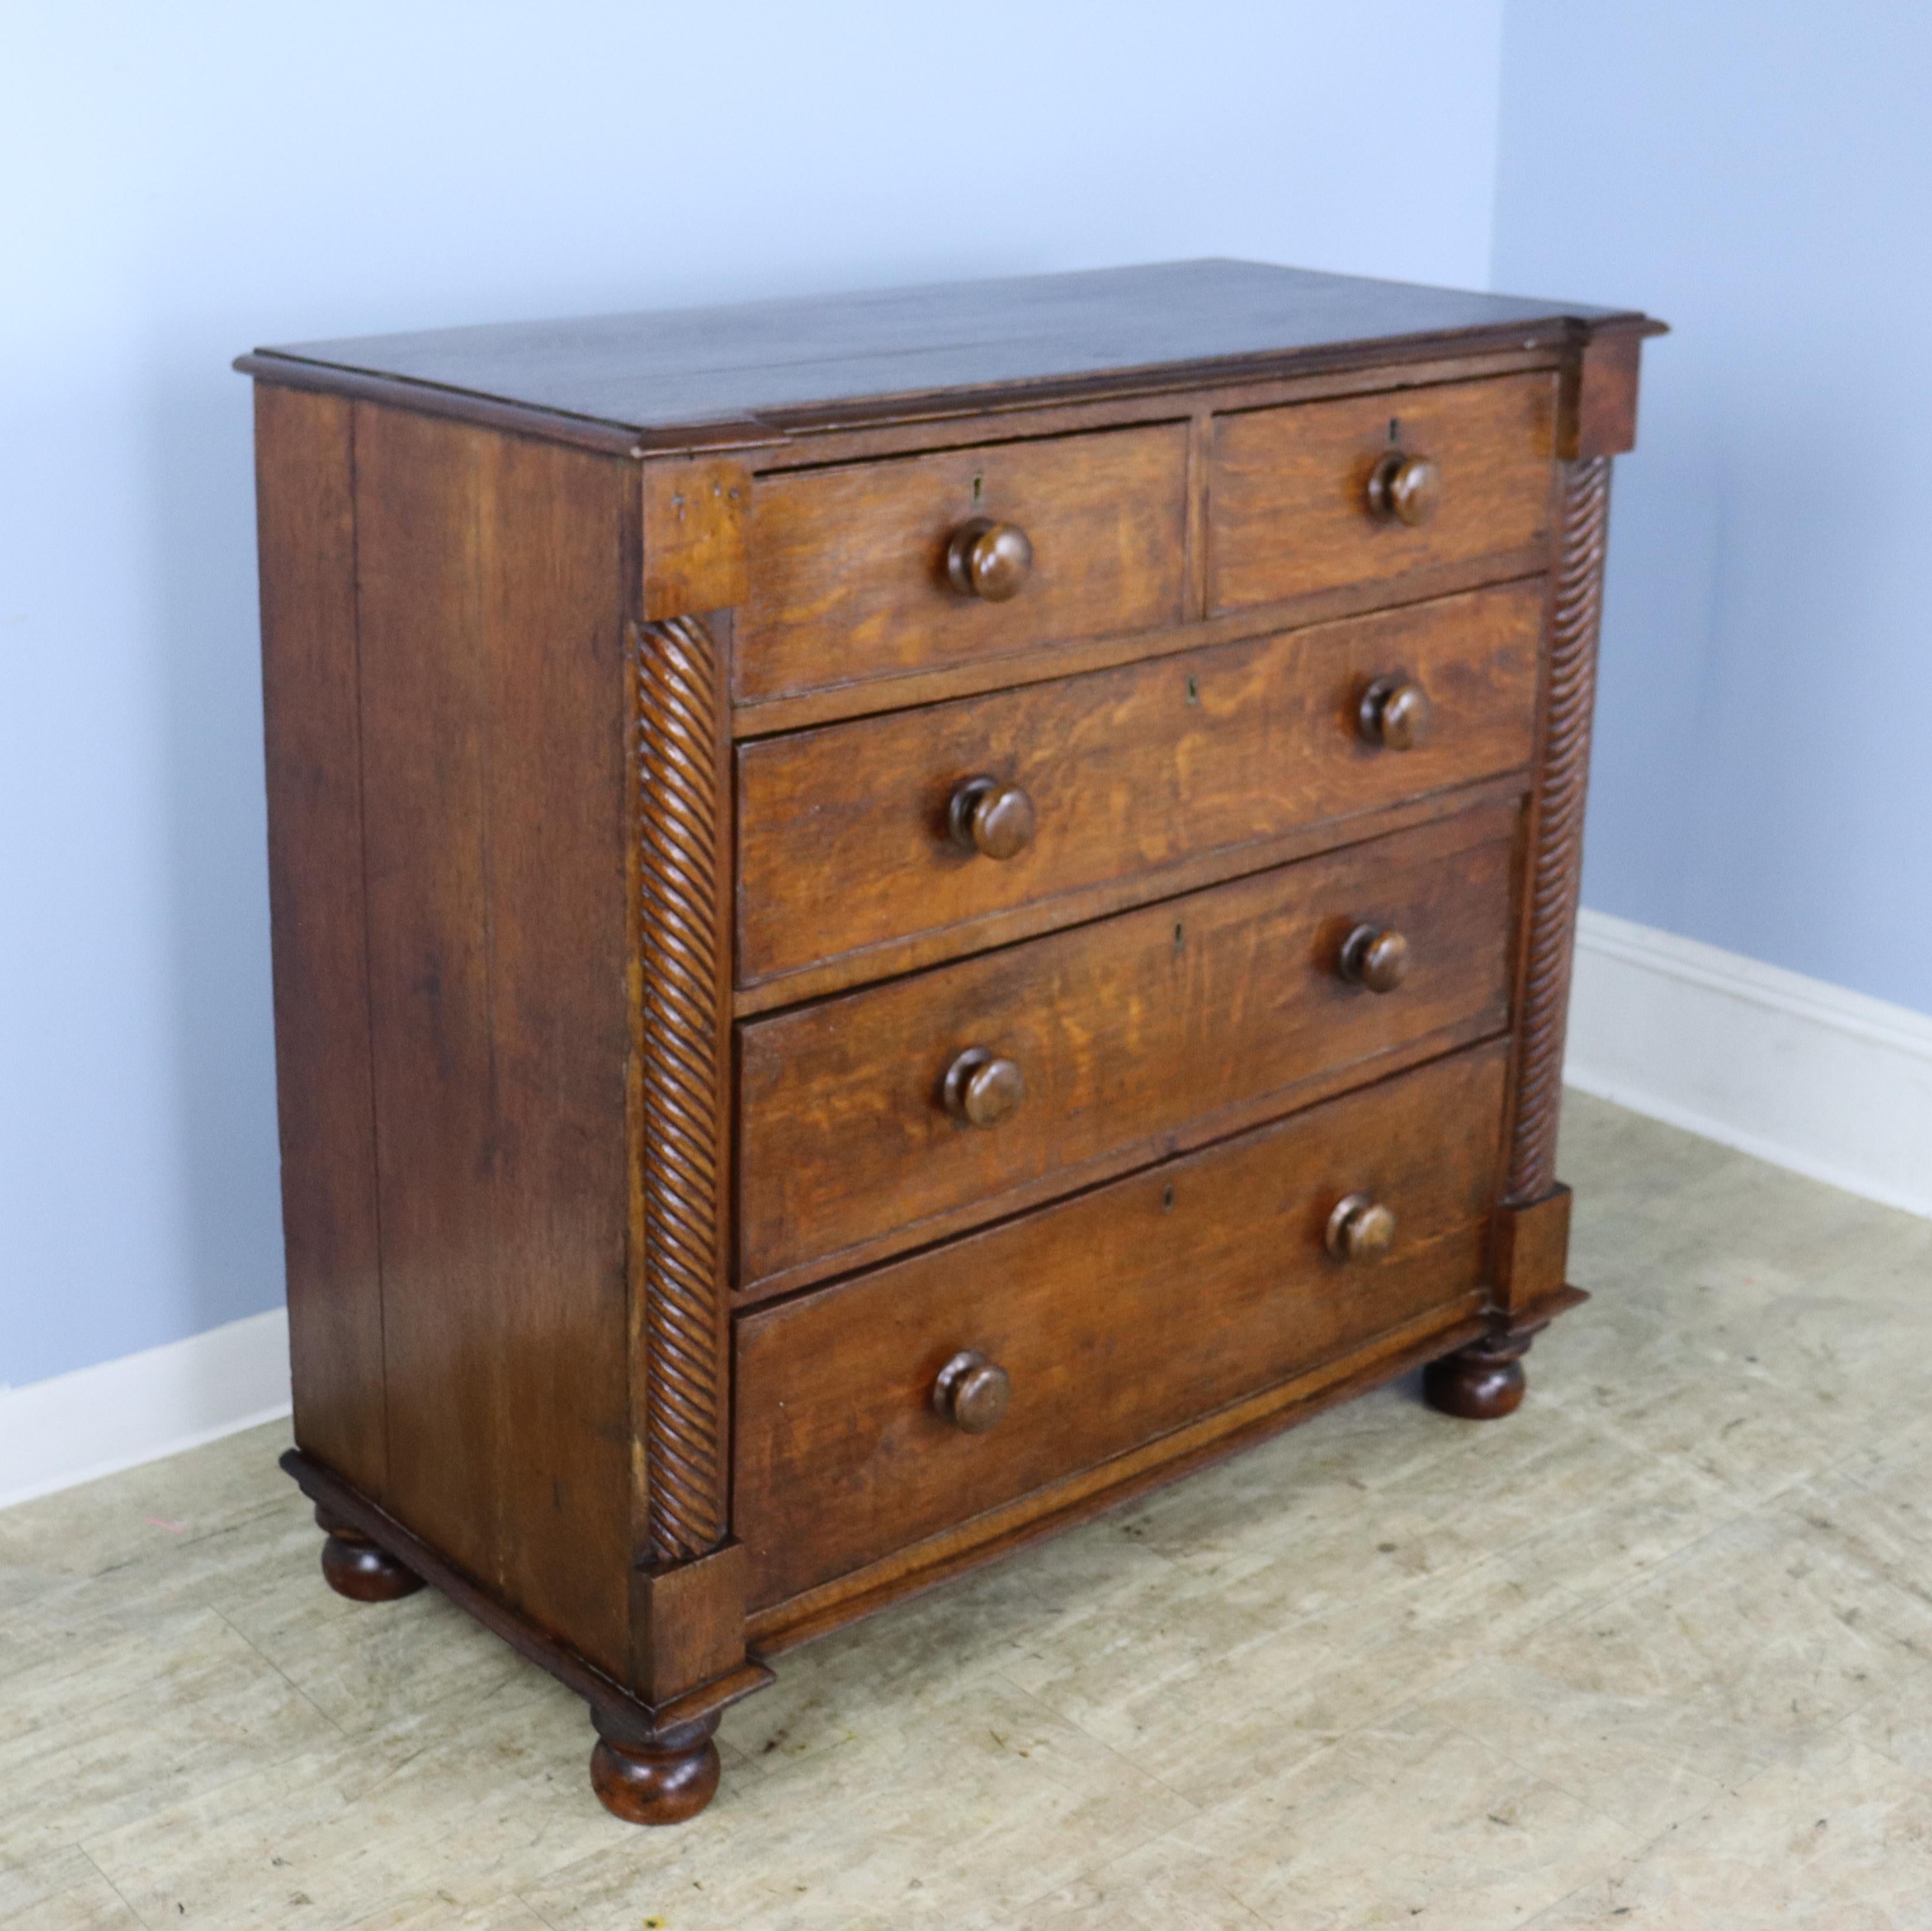 A charming oak chest of drawers in well grained and colored oak.  The twist columns at either side add an eye catching design note, as do the bun feet.  This piece is in good antique condition for it's age and use.